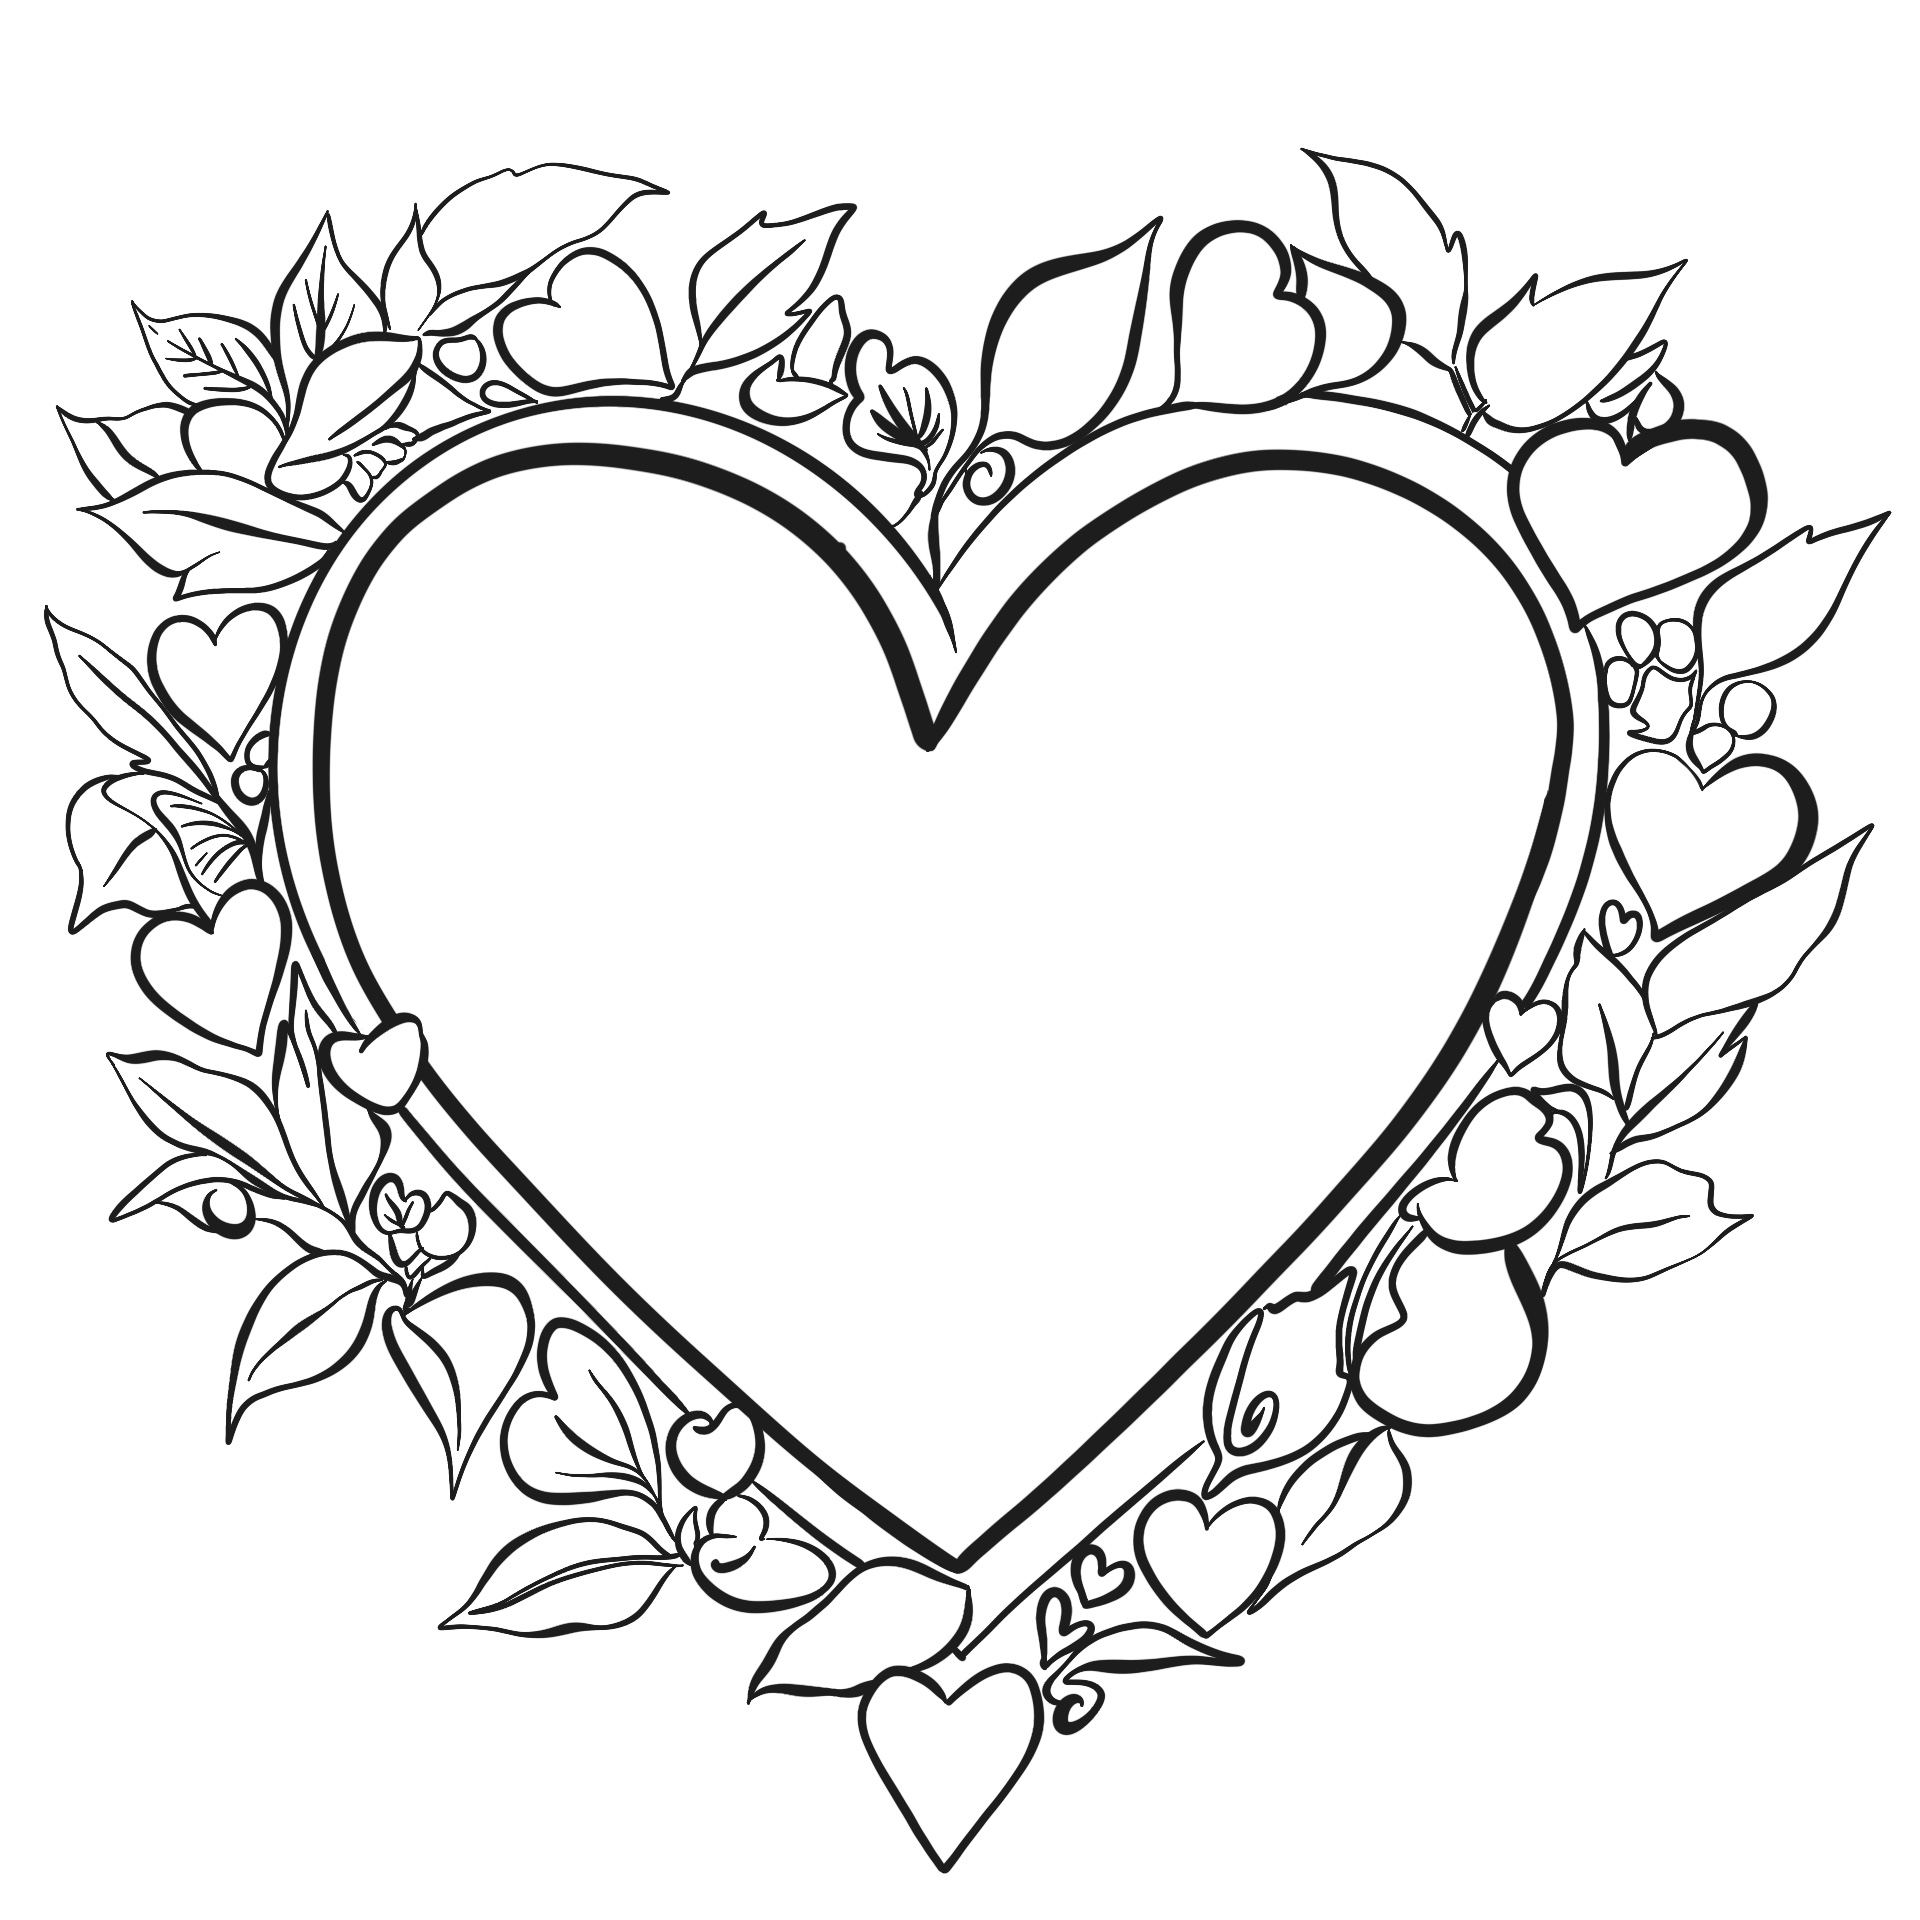 Printable Valentine Coloring Page of a Picture Frame